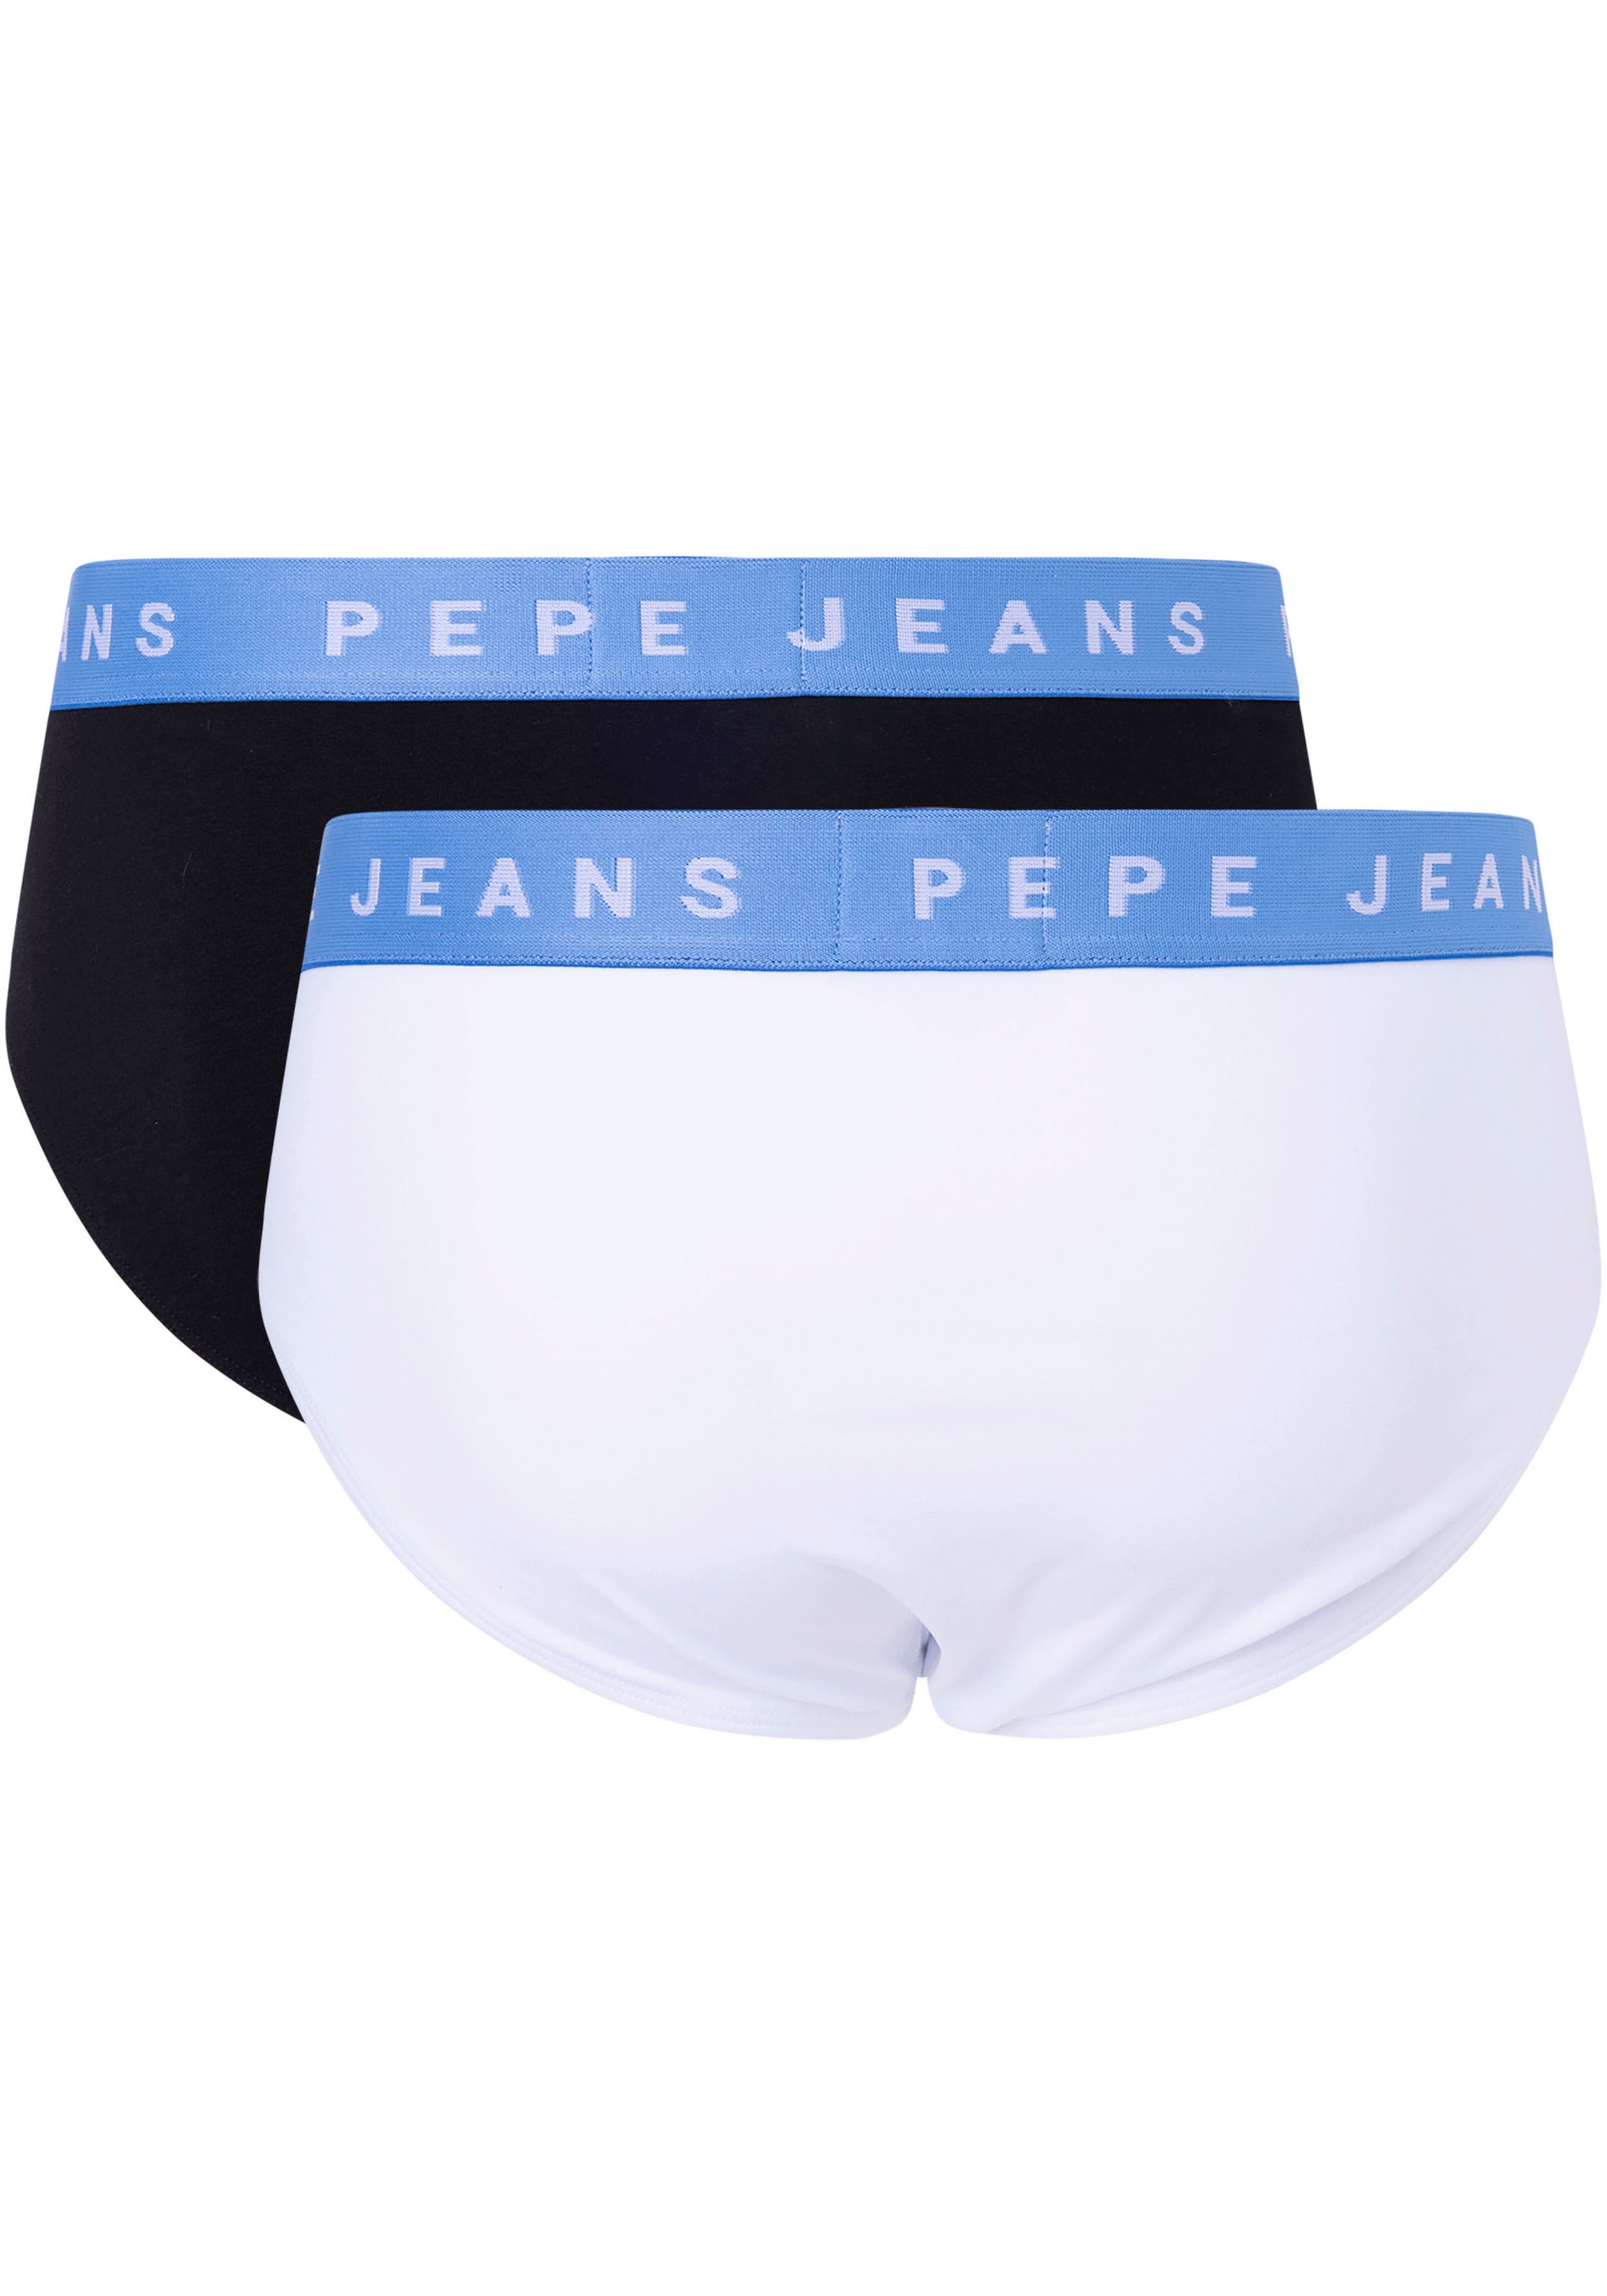 Pepe Jeans Slip, (Packung, 2 St.)